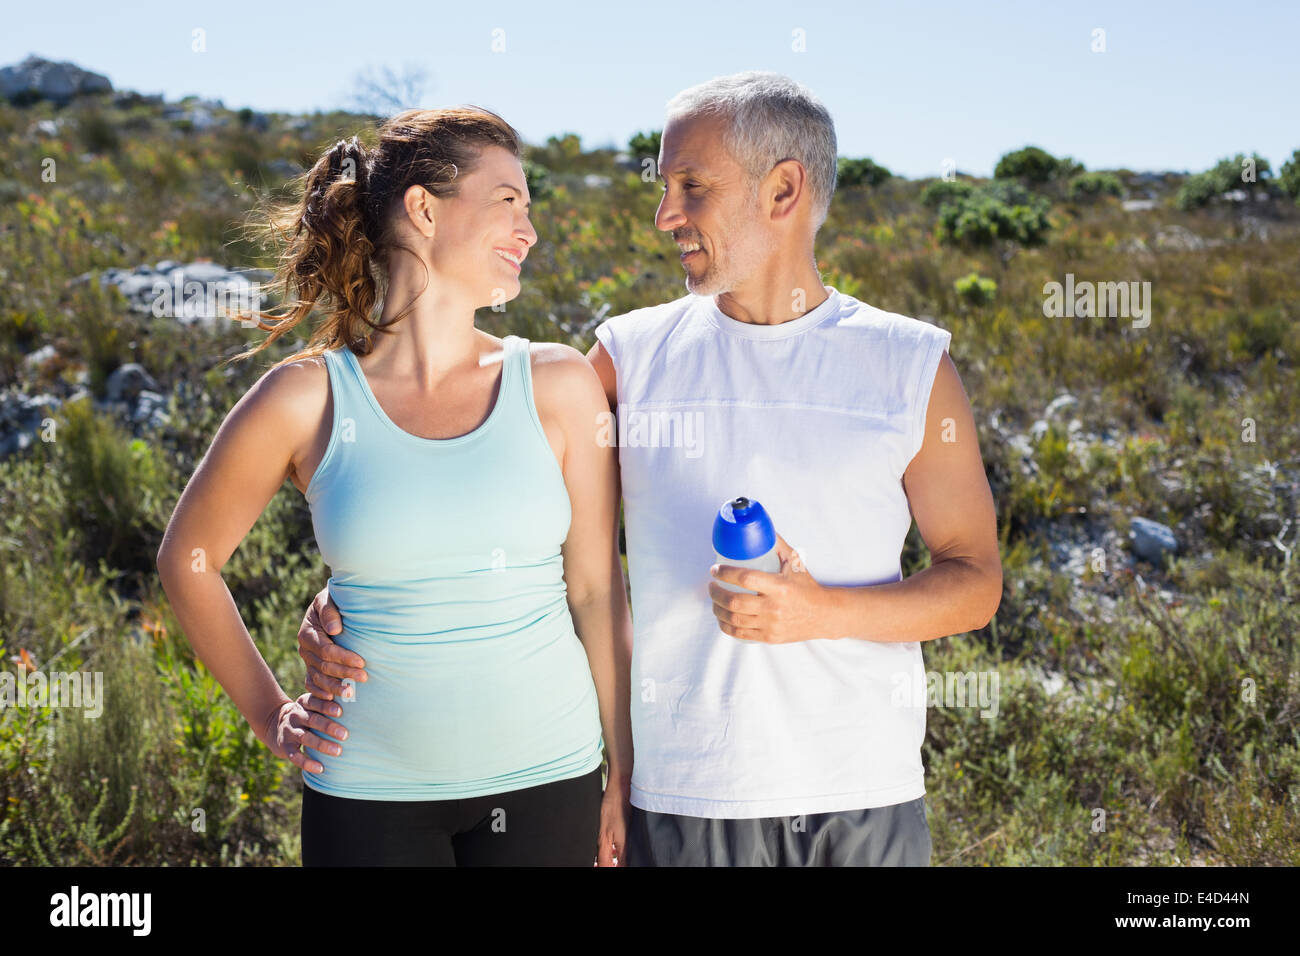 Active couple embracing each other on a jog in the country Stock Photo